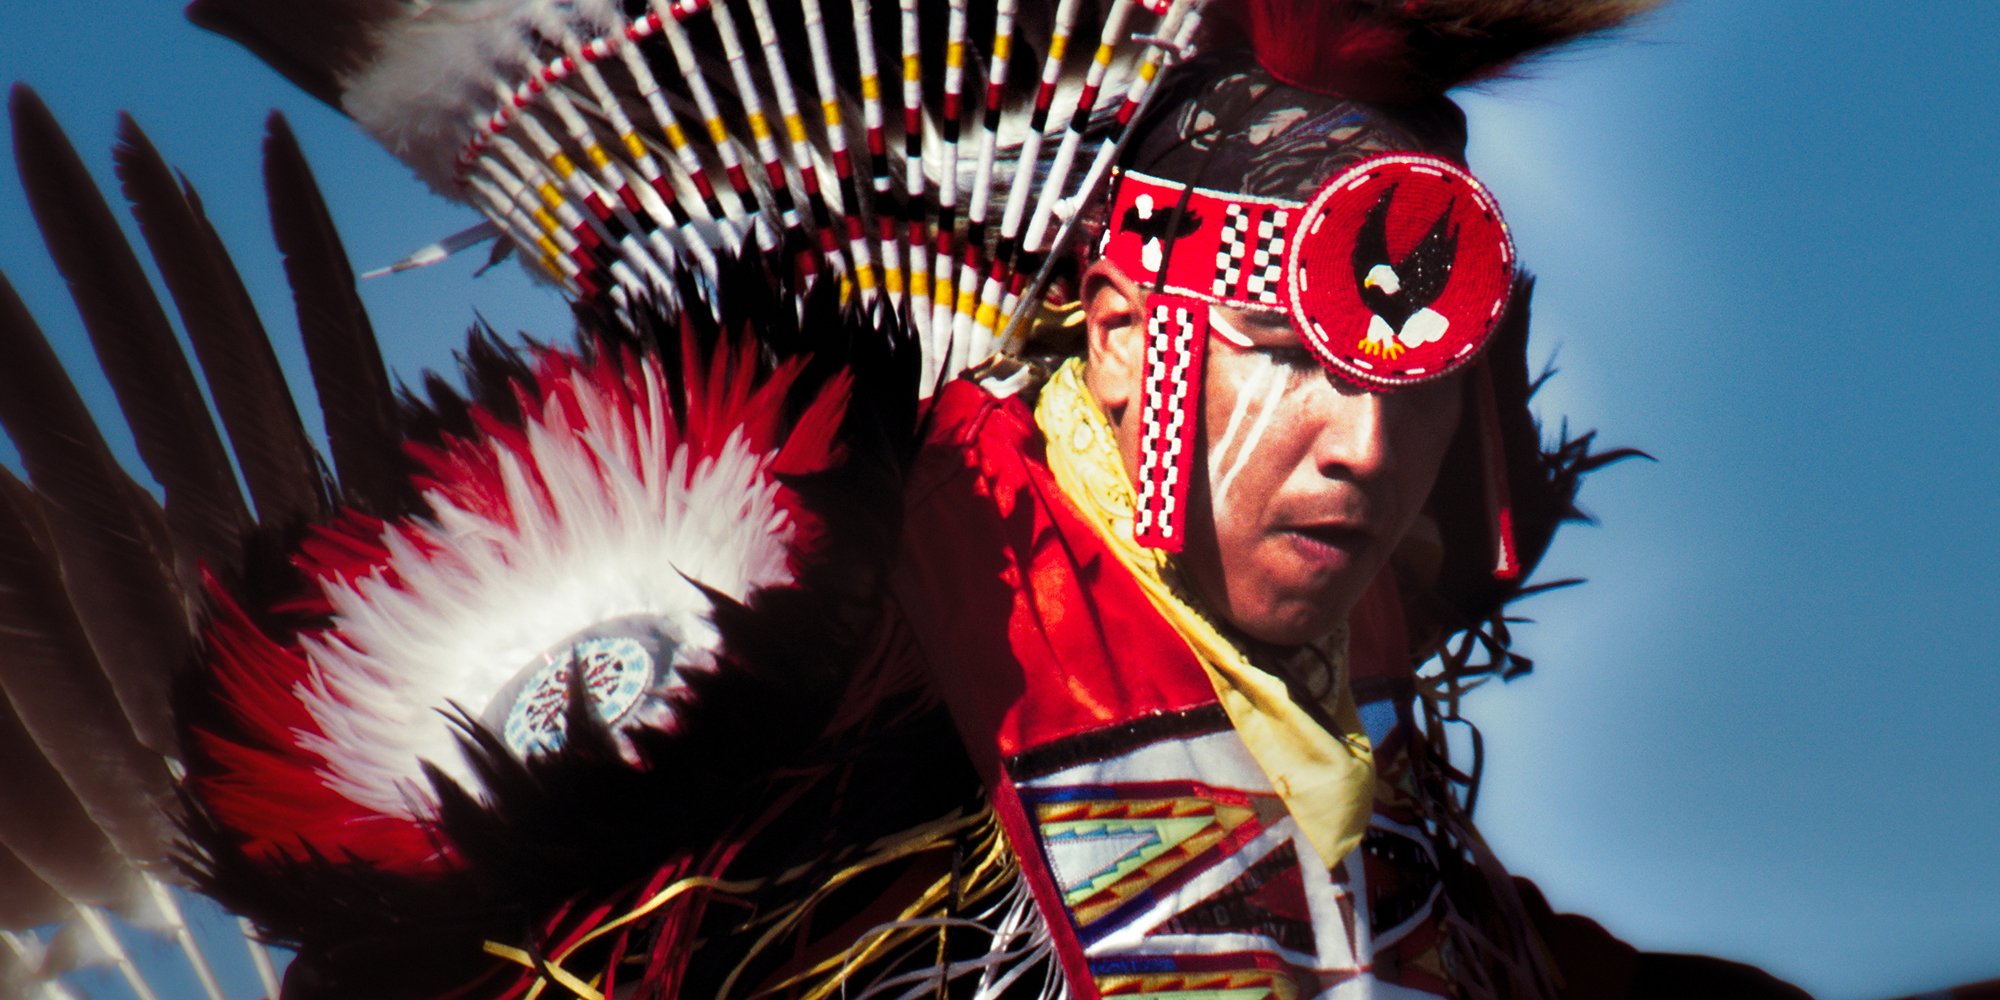 What Does Indigenous Awareness Mean?